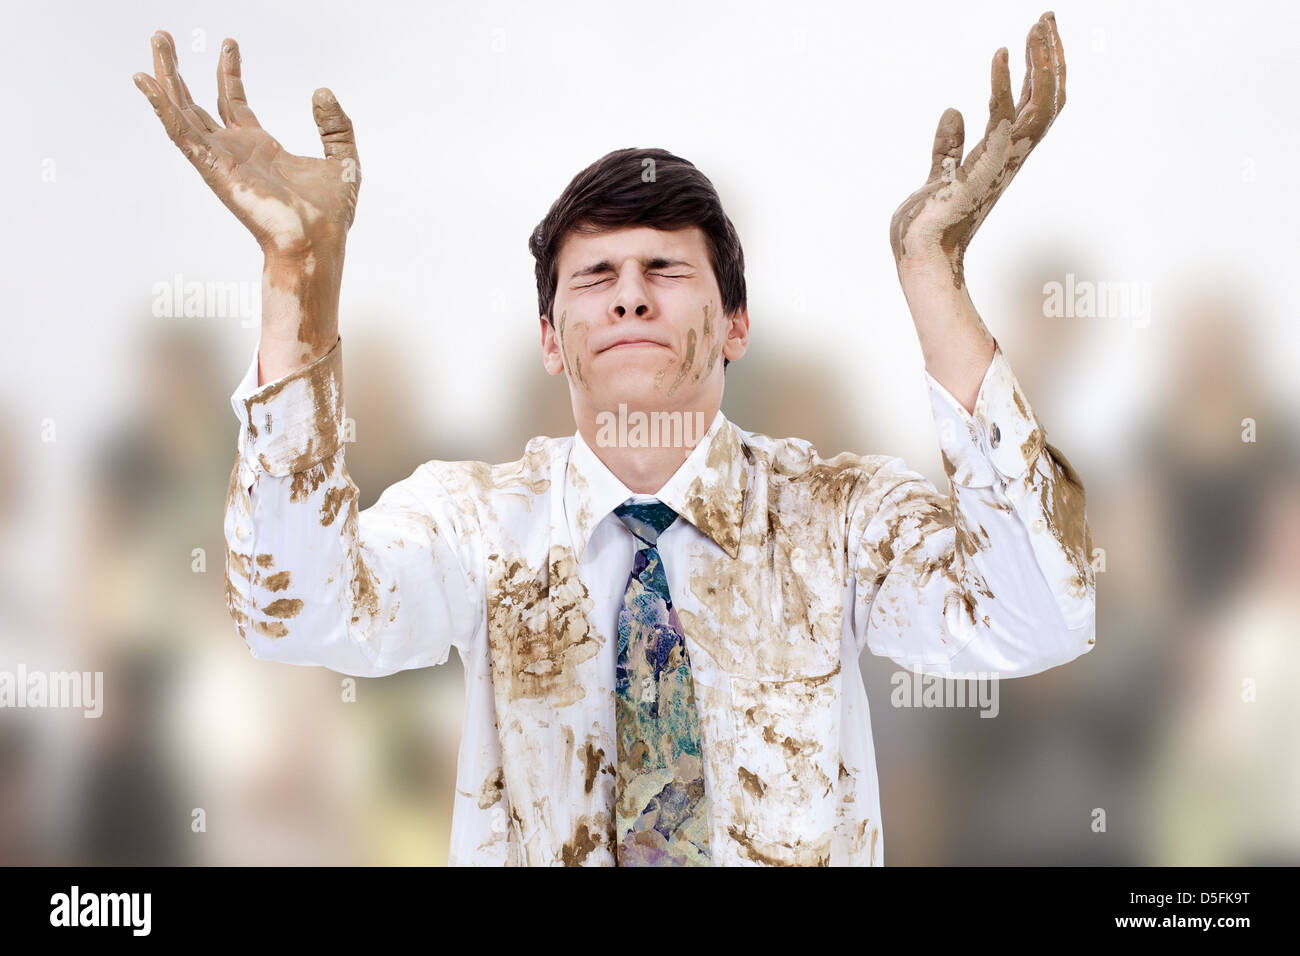 Young man raising dirty hands to heaven. Stock Photo